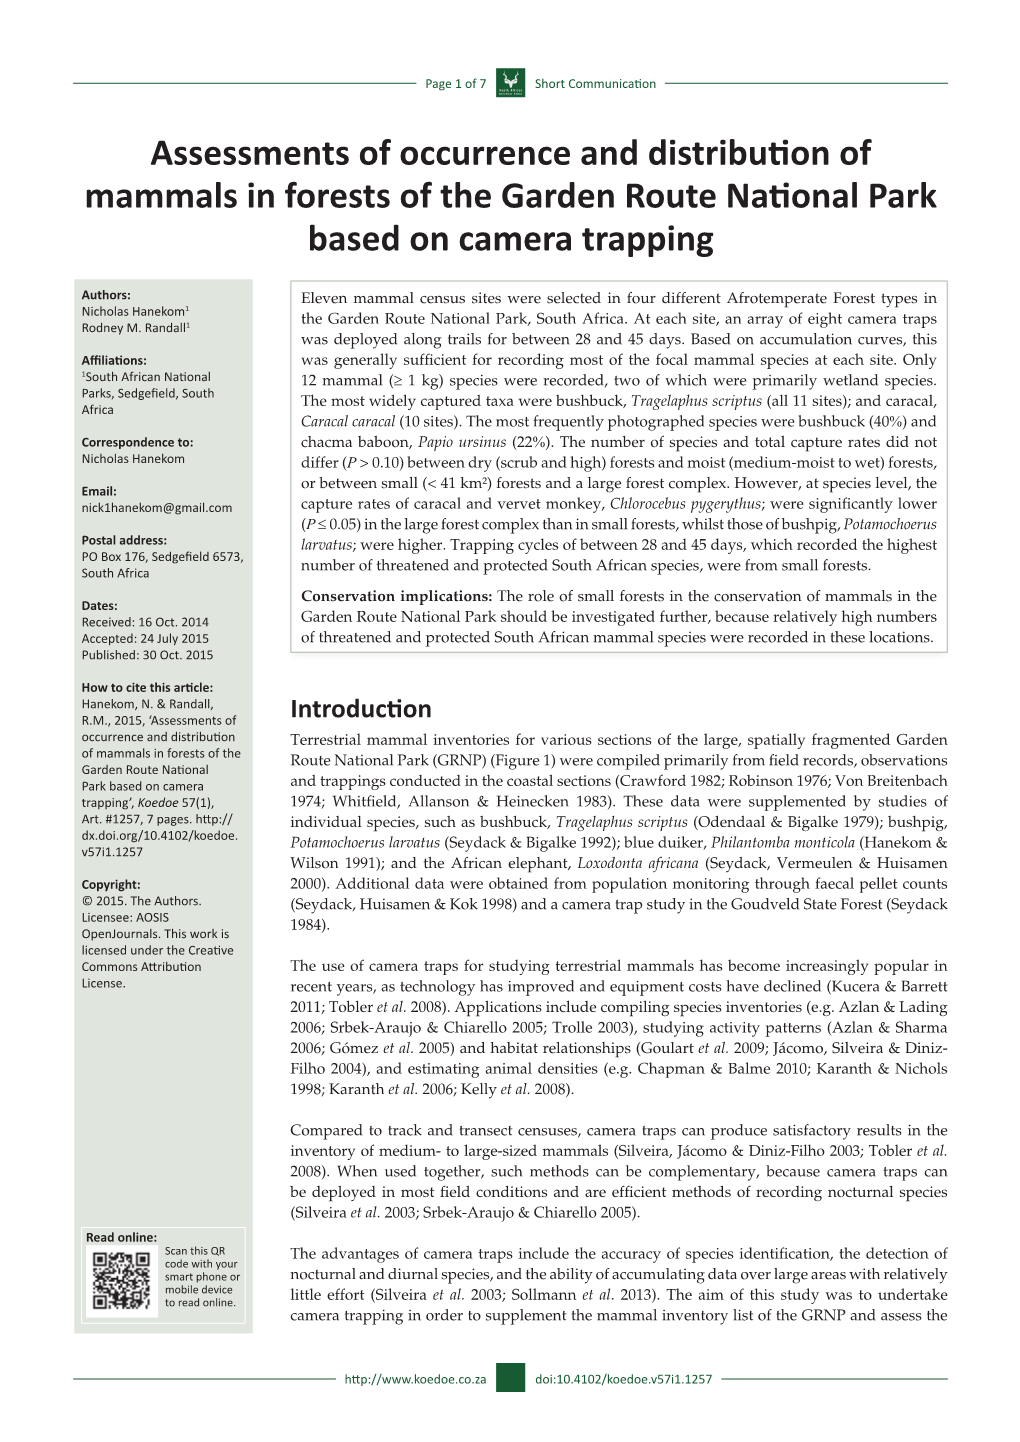 Assessments of Occurrence and Distribution of Mammals in Forests of the Garden Route National Park Based on Camera Trapping